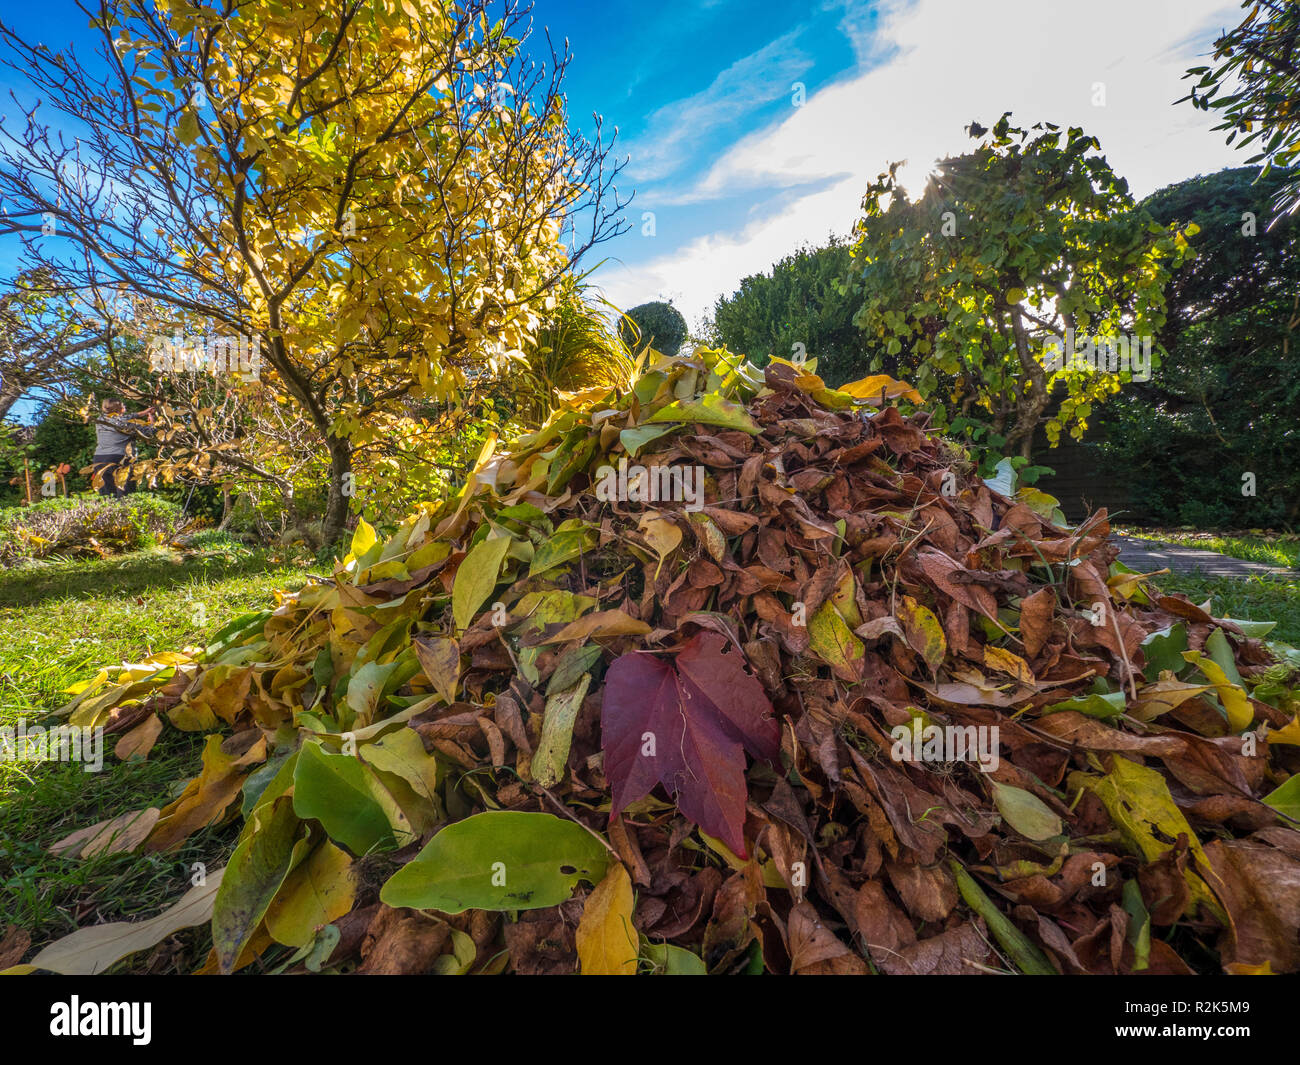 Large piles of leaves in the garden Stock Photo